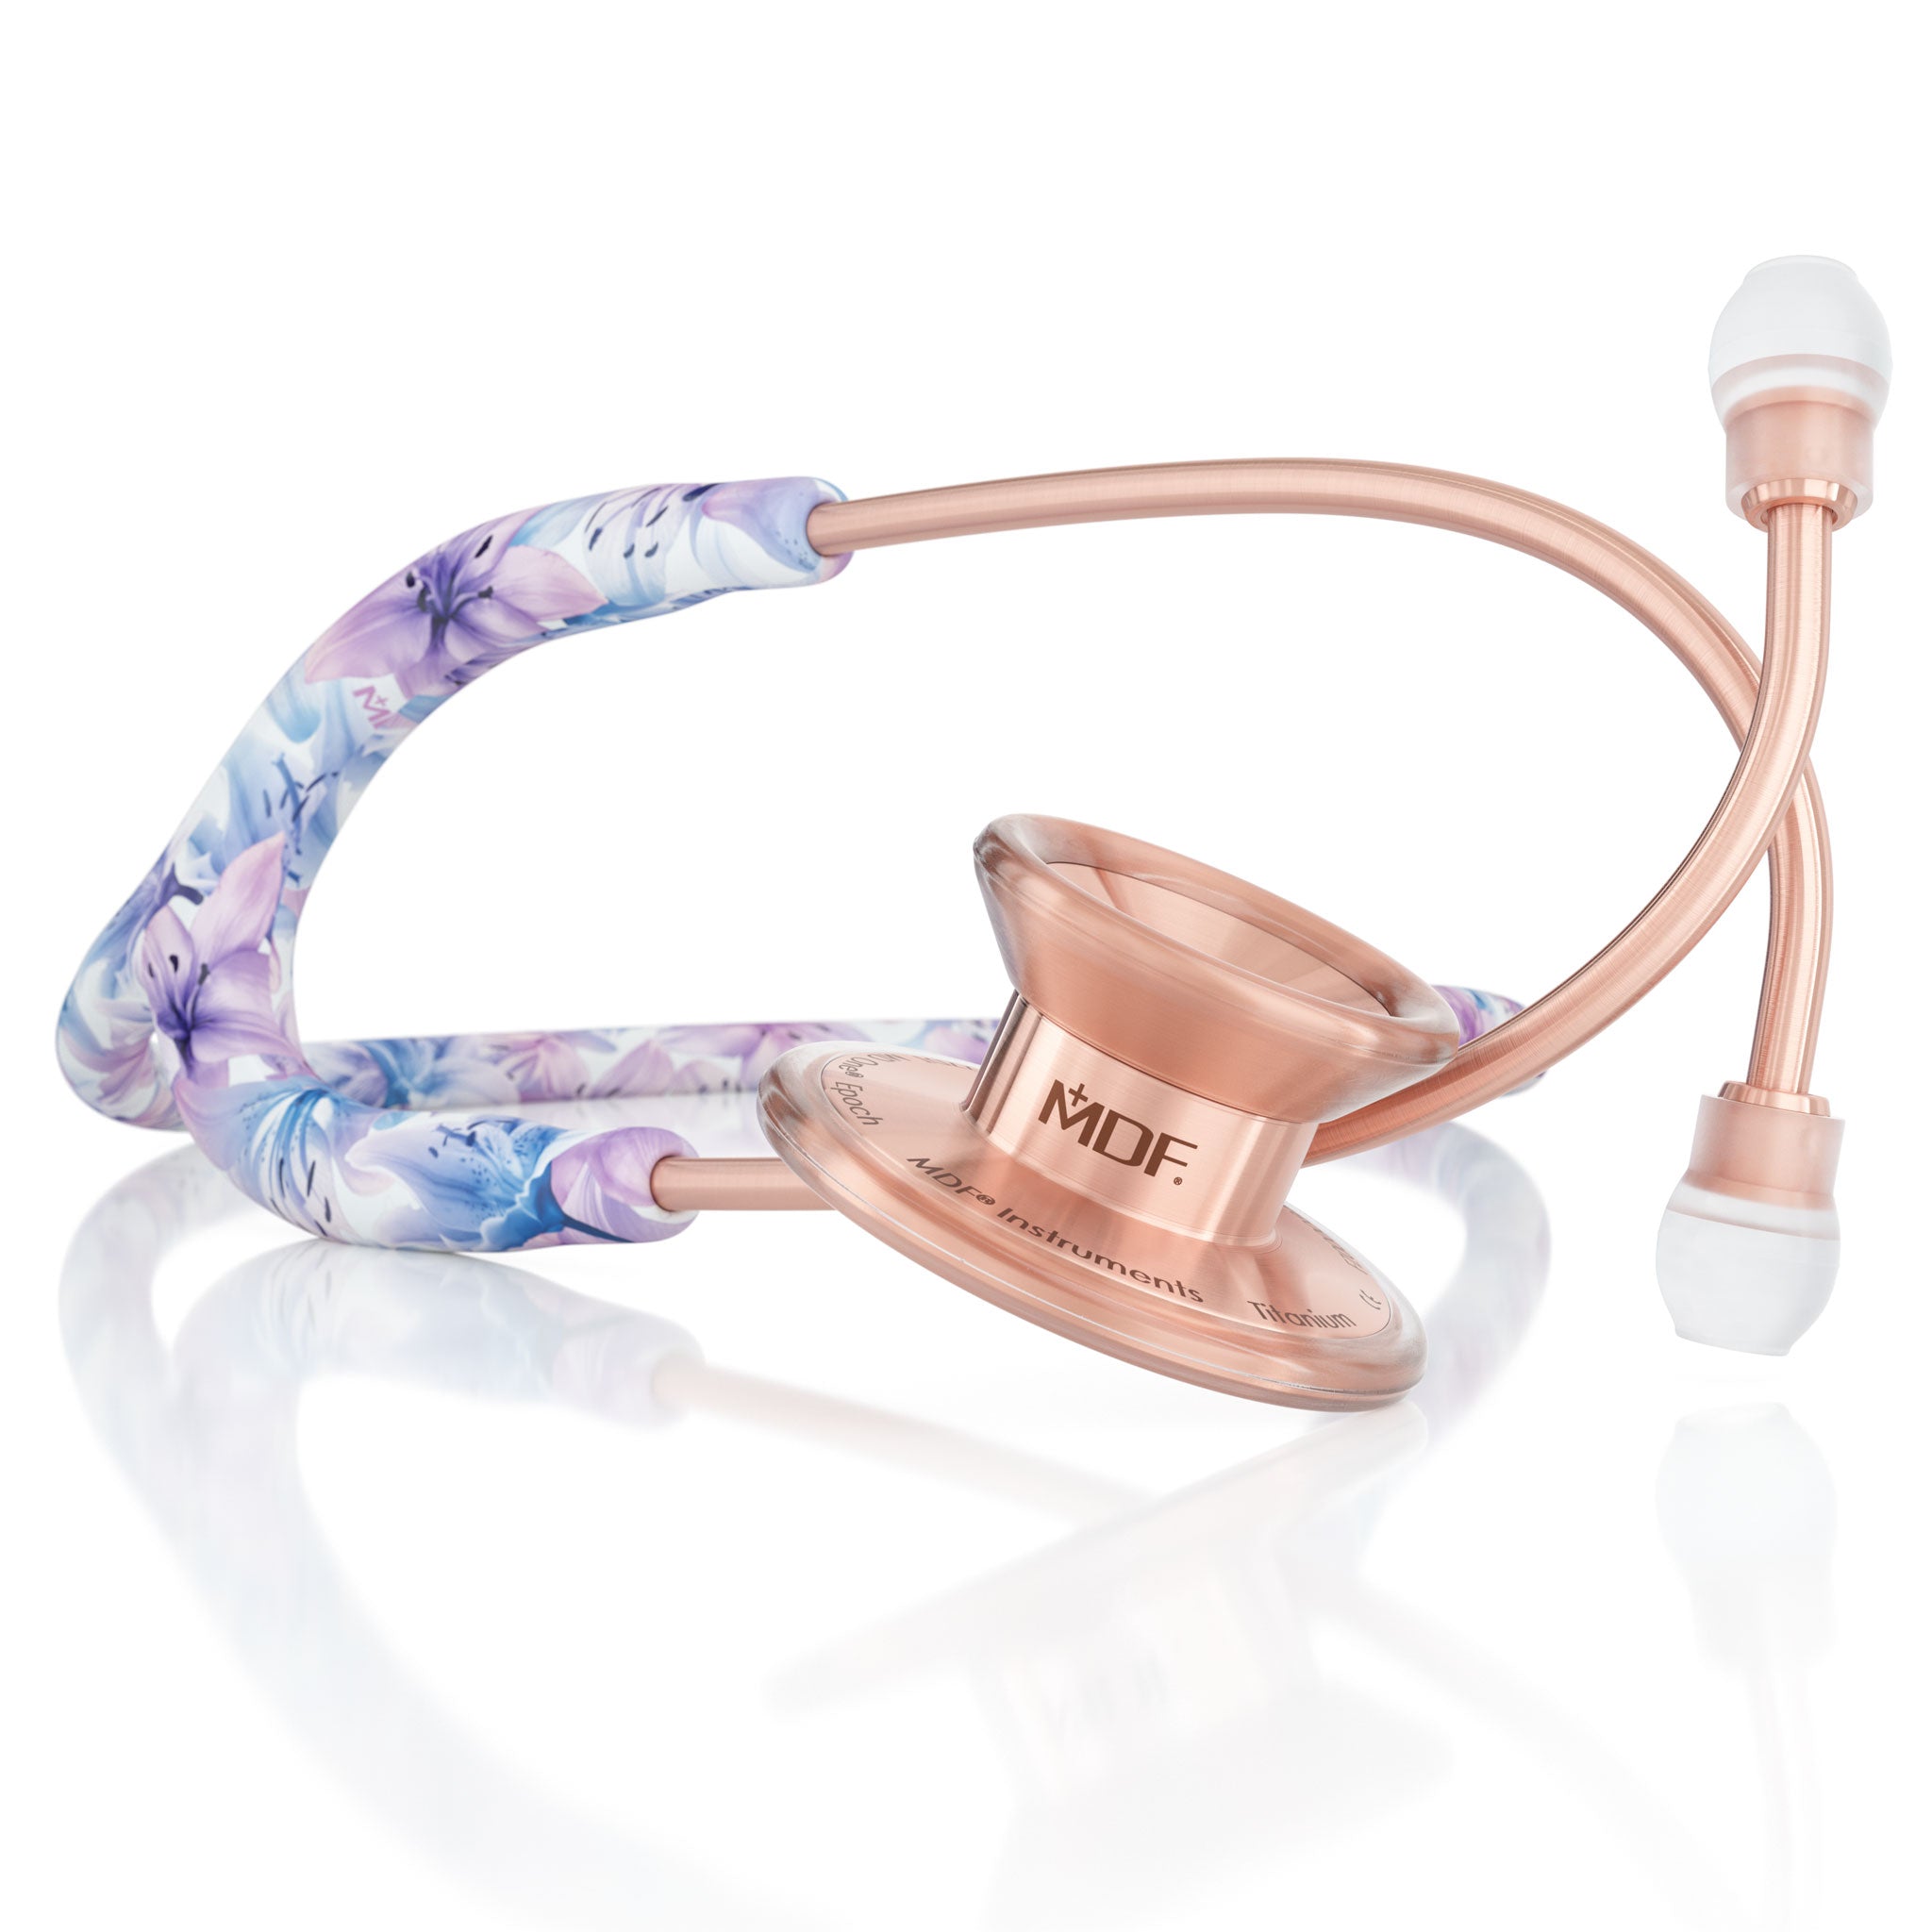 MDF Instruments® Stethoscope MD One® Epoch® Monet and Rose Gold